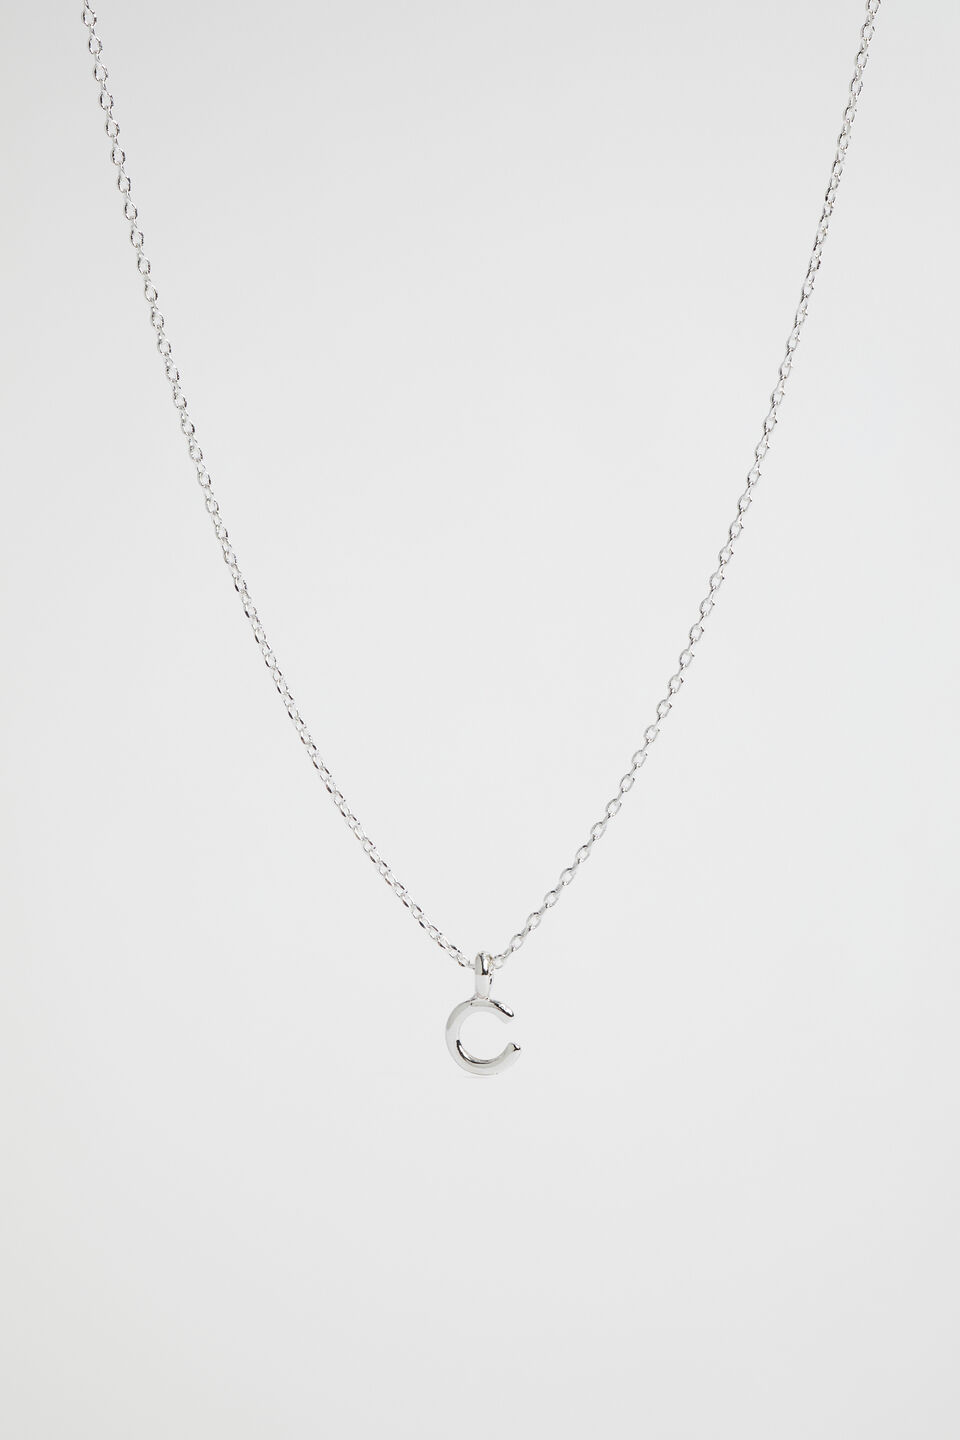 Silver Initial Necklace  C